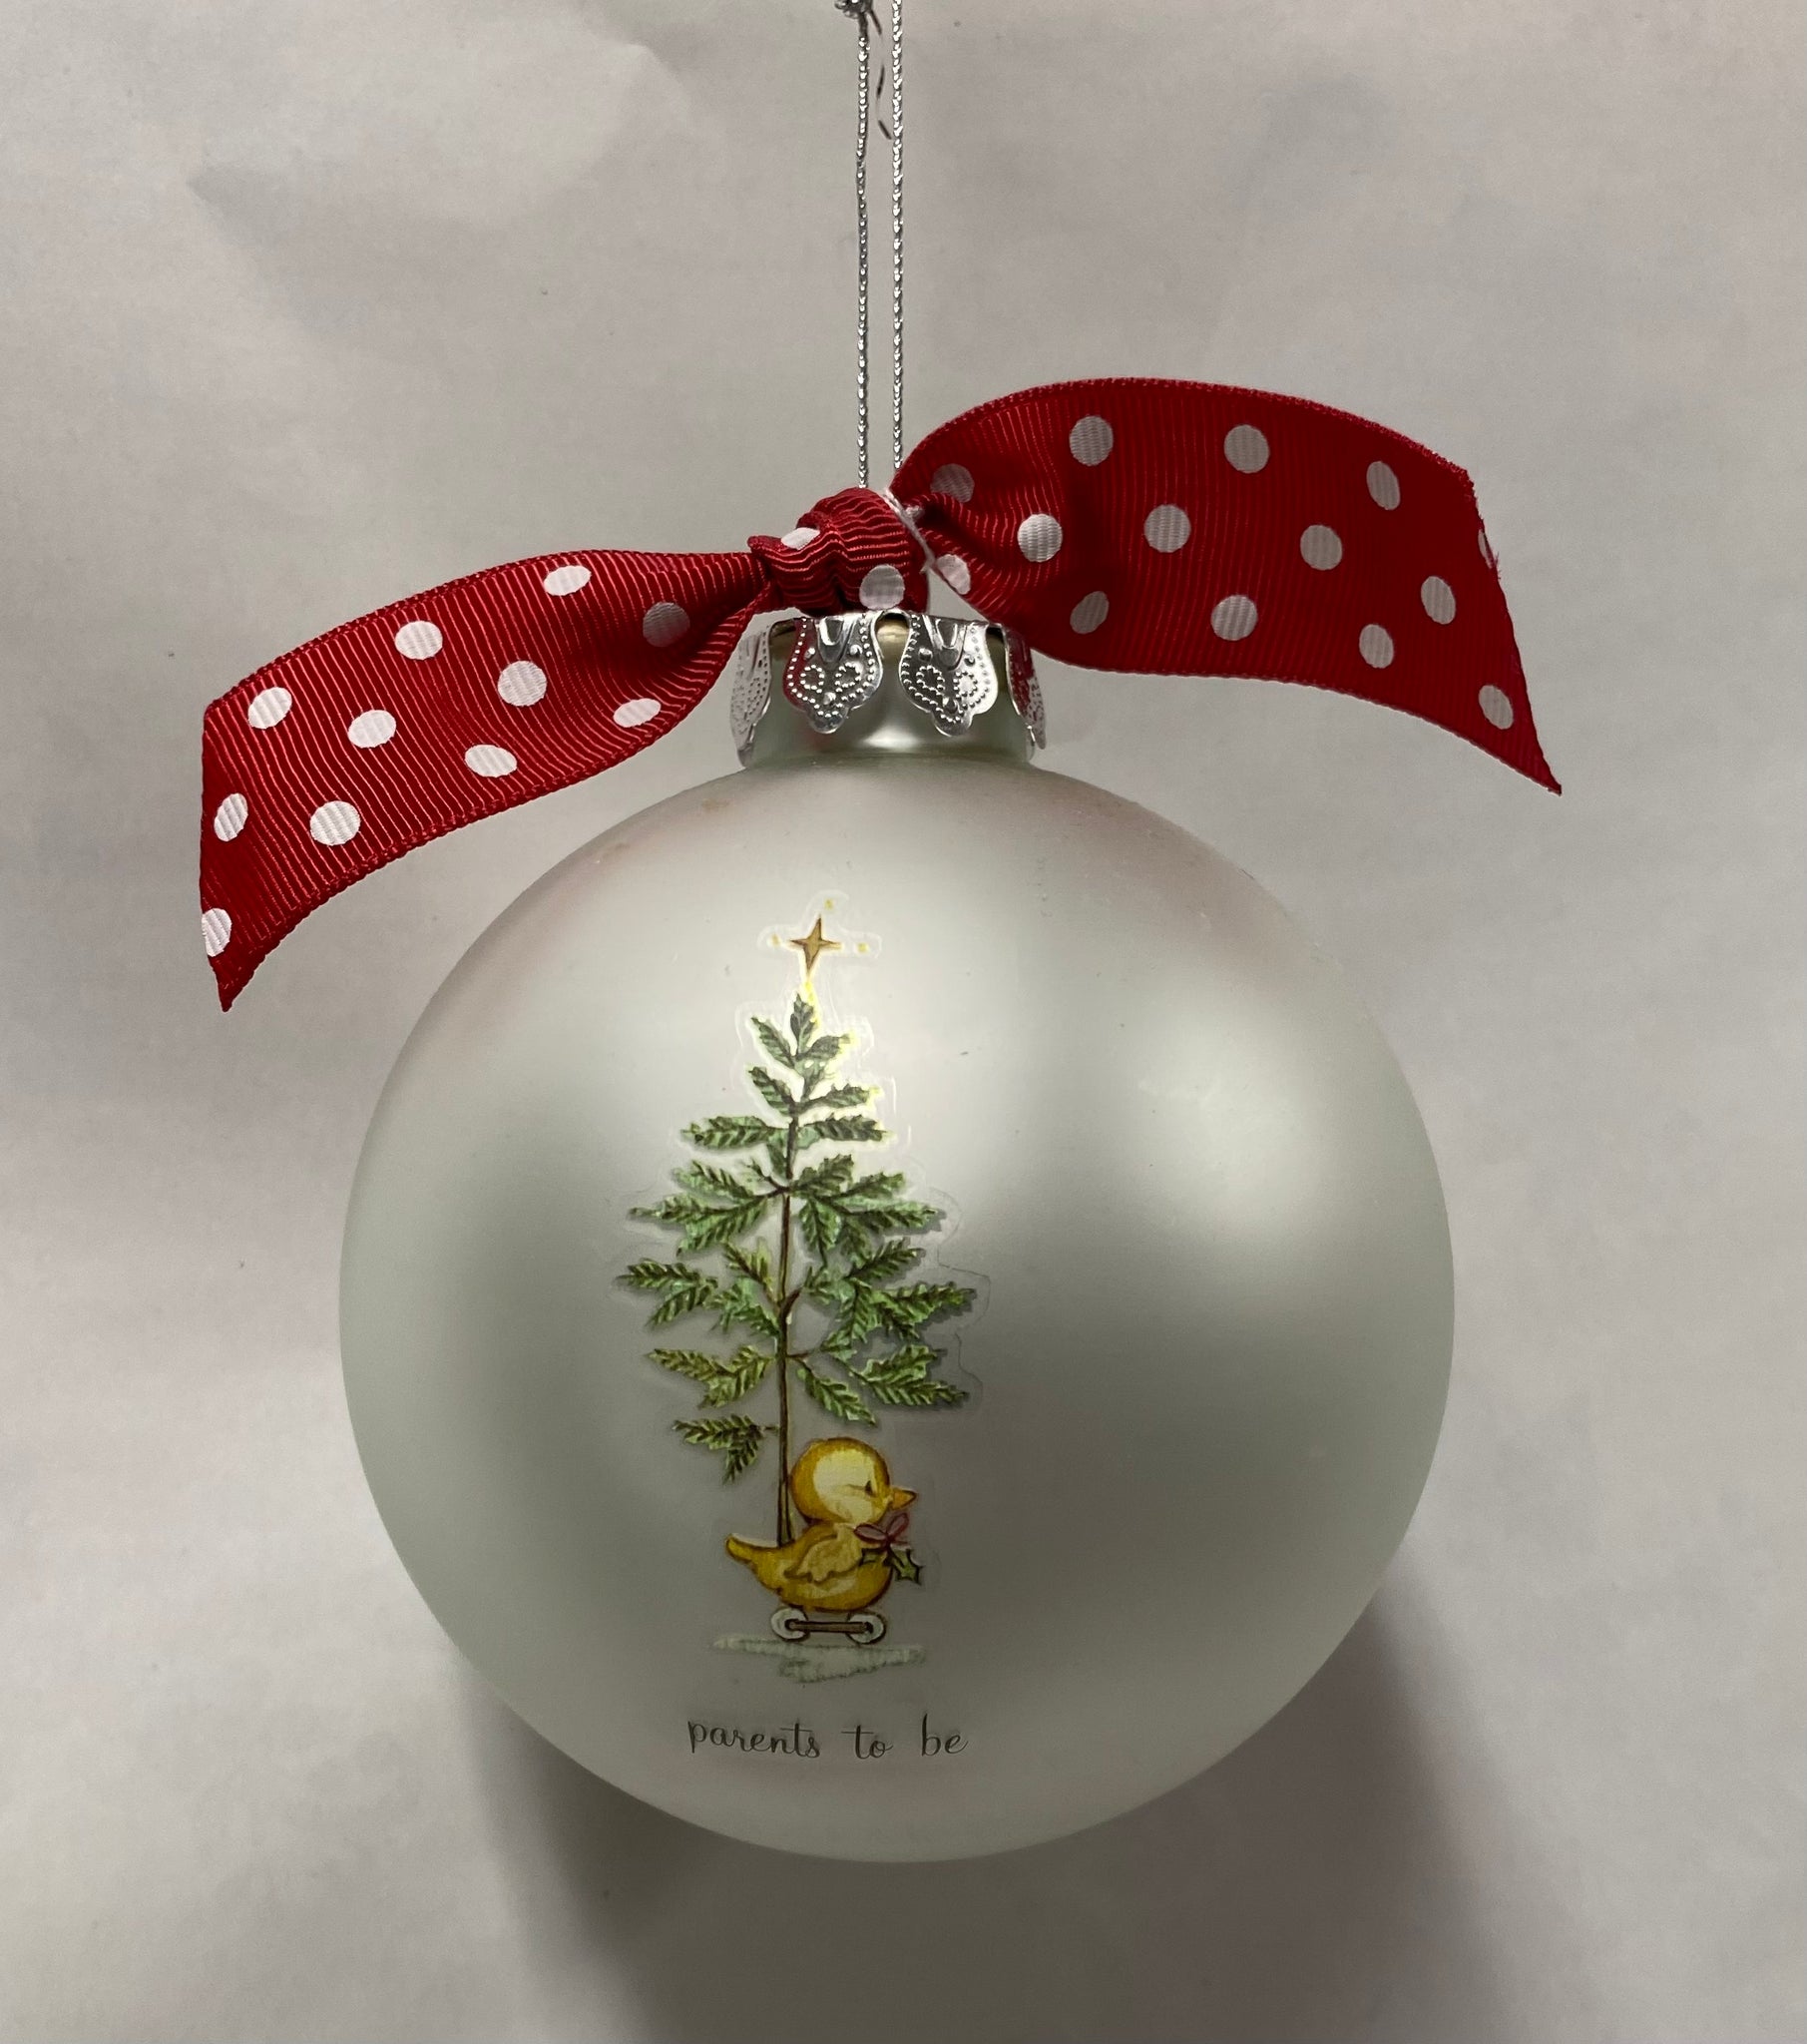 Tree Ornament- “Parents To Be”